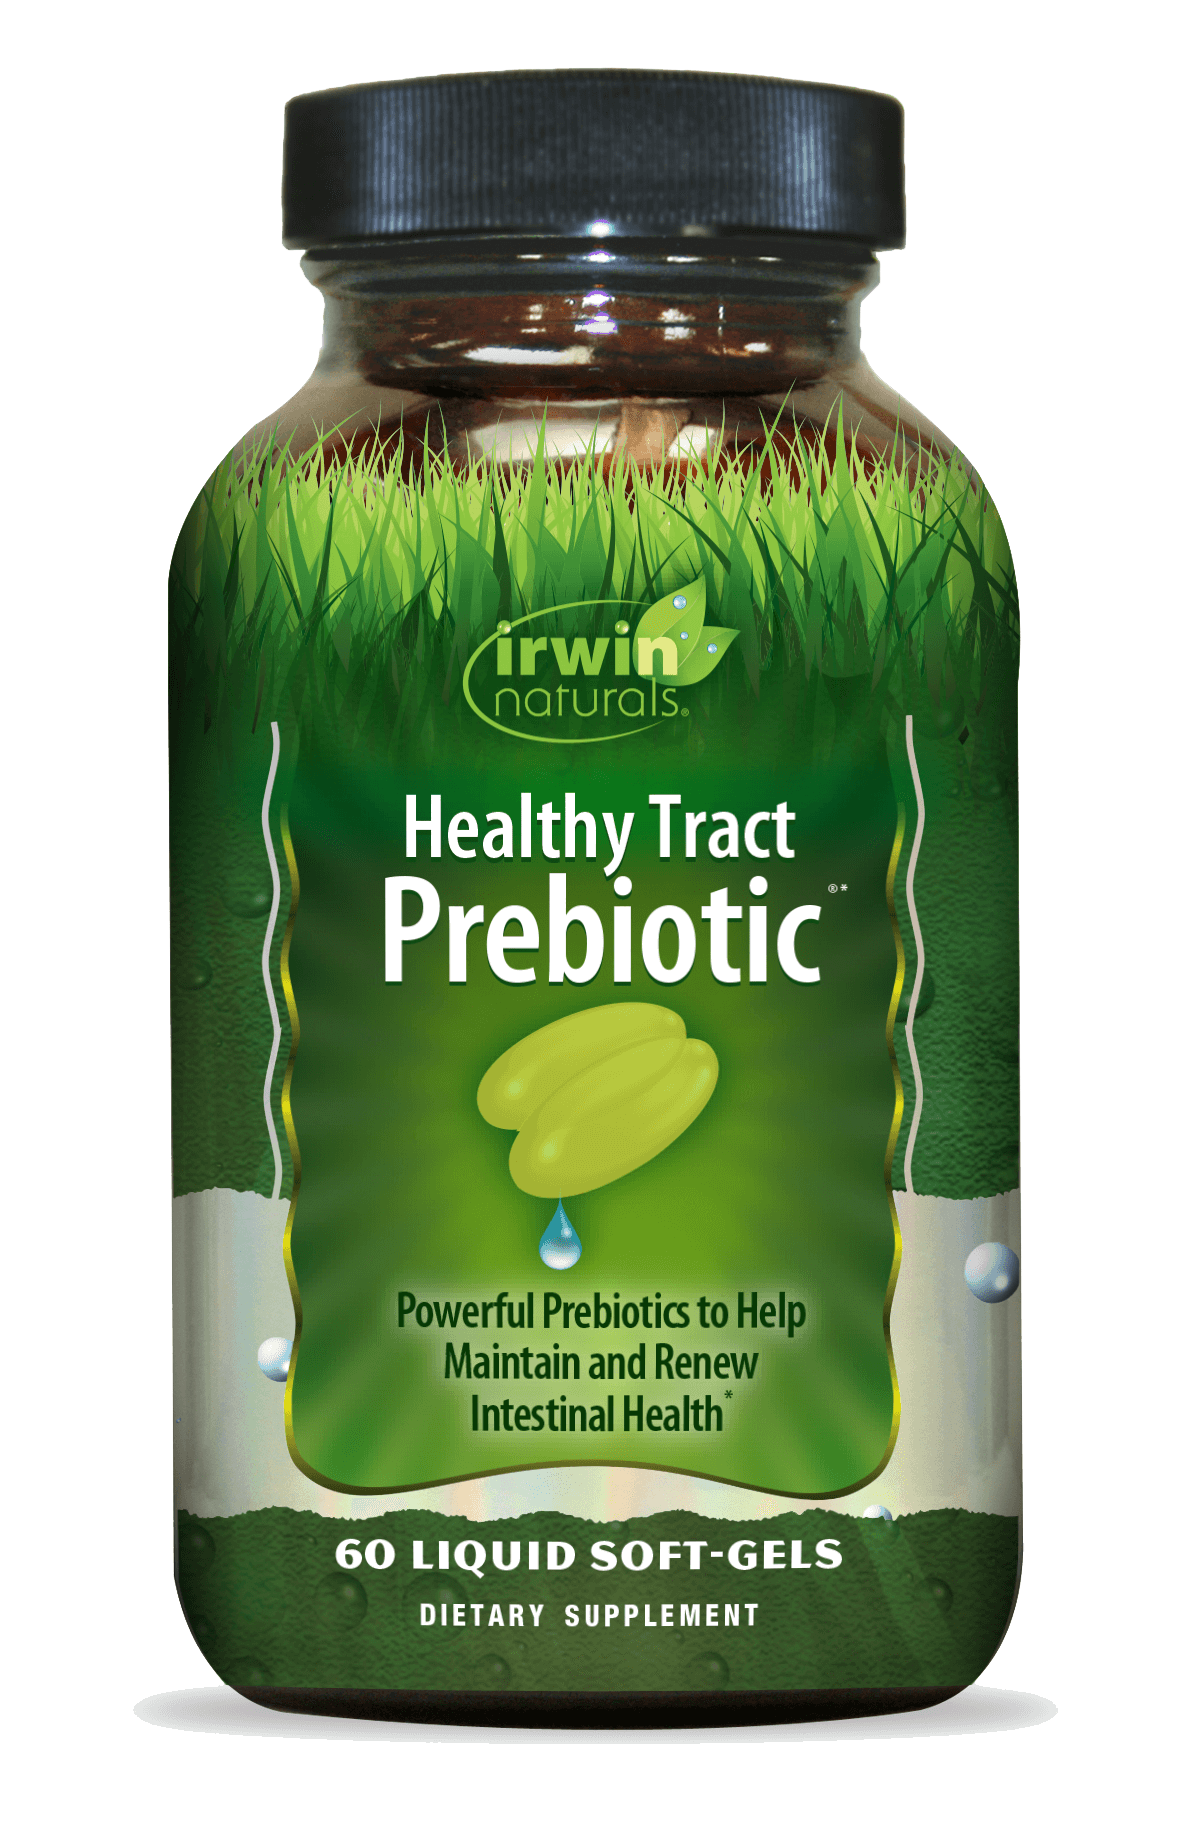 Healthy Tract Prebiotic by Irwin Naturals